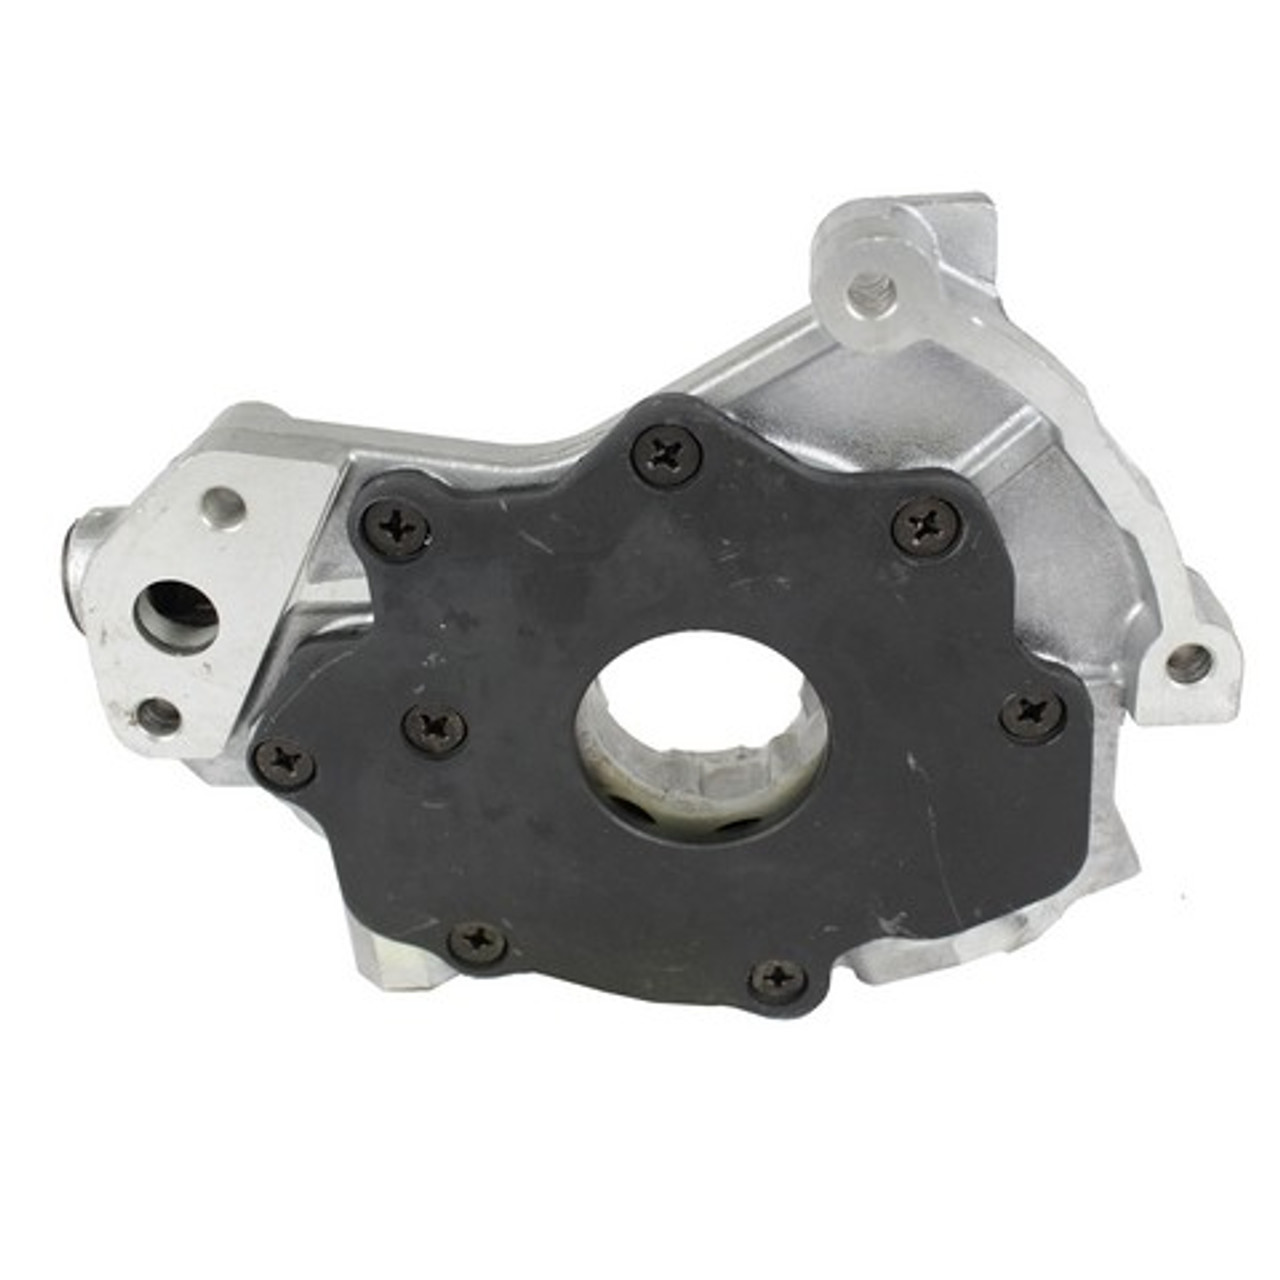 Oil Pump 5.4L 2005 Ford Expedition - OP4179.1